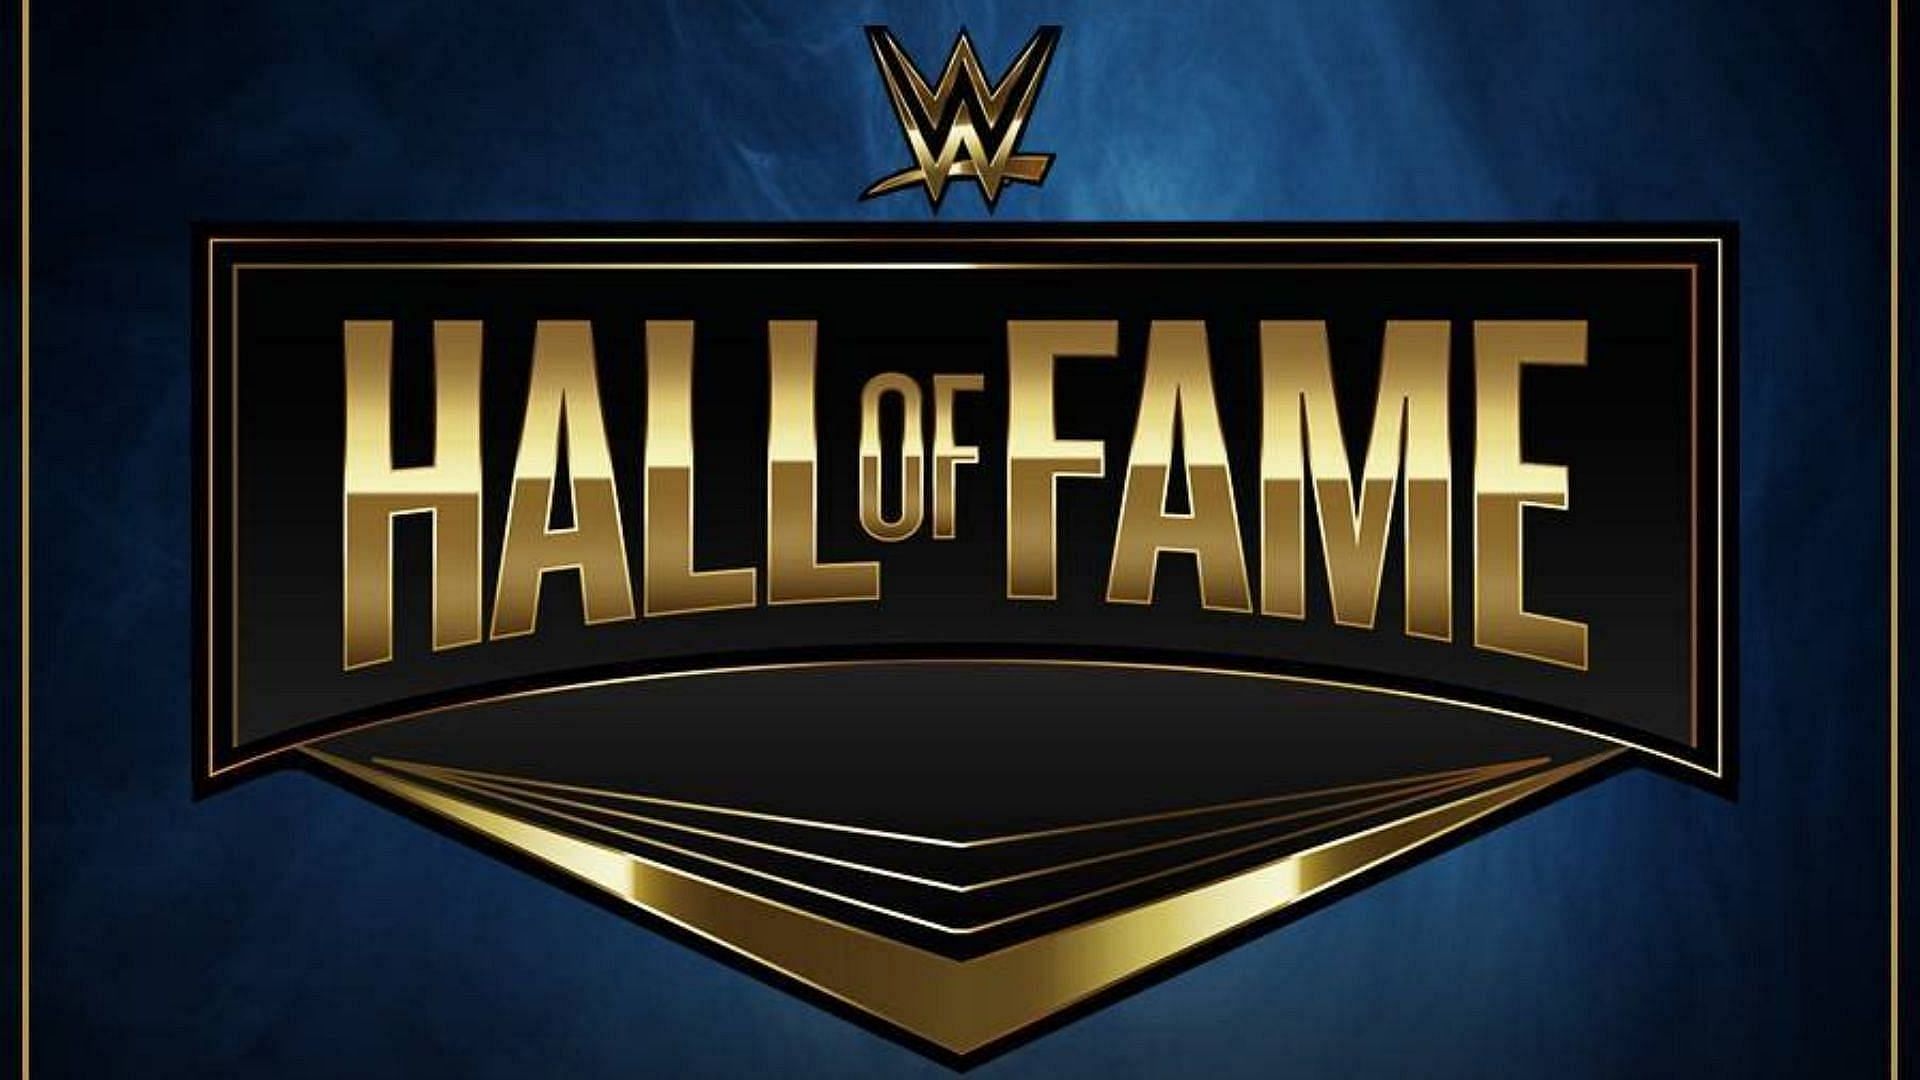 WWE has been using this logo for the Hall of Fame since 2019.